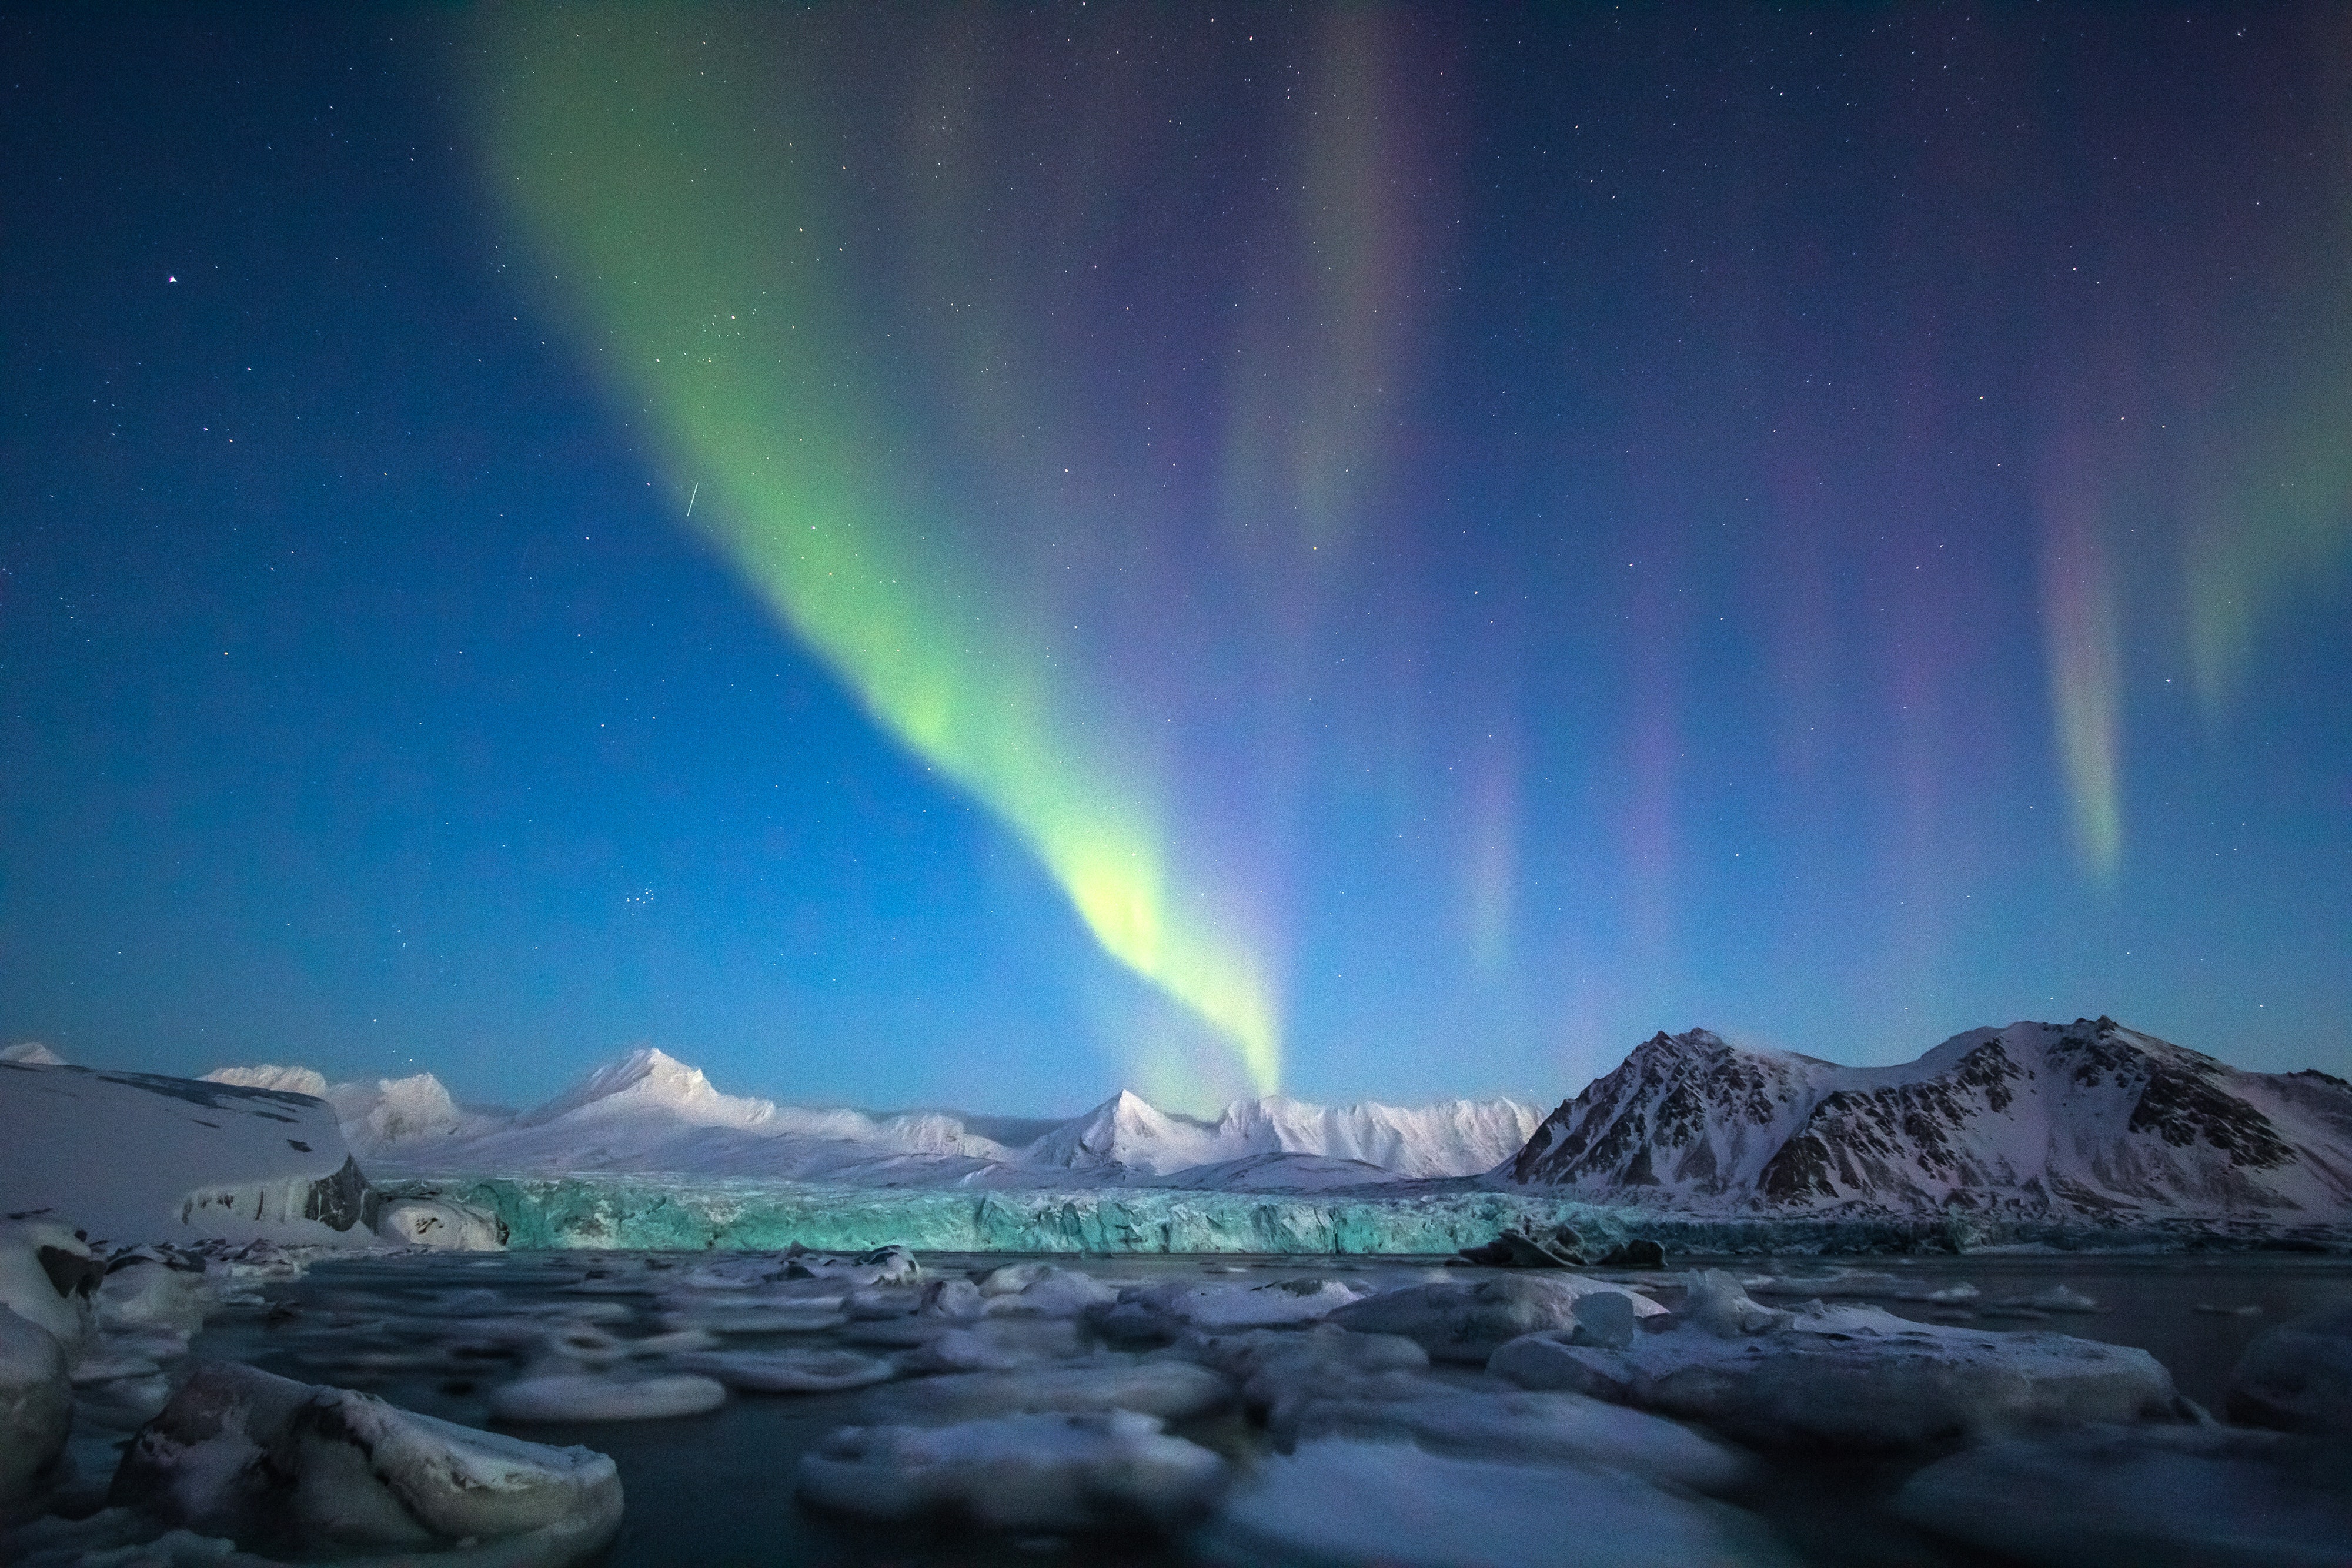 Svalbard, the northern archipelago off the coast of Norway, is known for spectacular <a href="https://www.cntraveler.com/stories/2011-11-07/best-places-to-stay-to-see-the-northern-lights?mbid=synd_msn_rss&utm_source=msn&utm_medium=syndication">Northern Lights</a> viewing opportunities—the sky is pitch black all day and night from October through February, due to its position within the Arctic Circle. Svalbard is also celebrated for its wildlife, including polar bears and arctic foxes who live out their days among the deep fjords and sheets of ice.<p>Sign up to receive the latest news, expert tips, and inspiration on all things travel</p><a href="https://www.cntraveler.com/newsletter/the-daily?sourceCode=msnsend">Inspire Me</a>